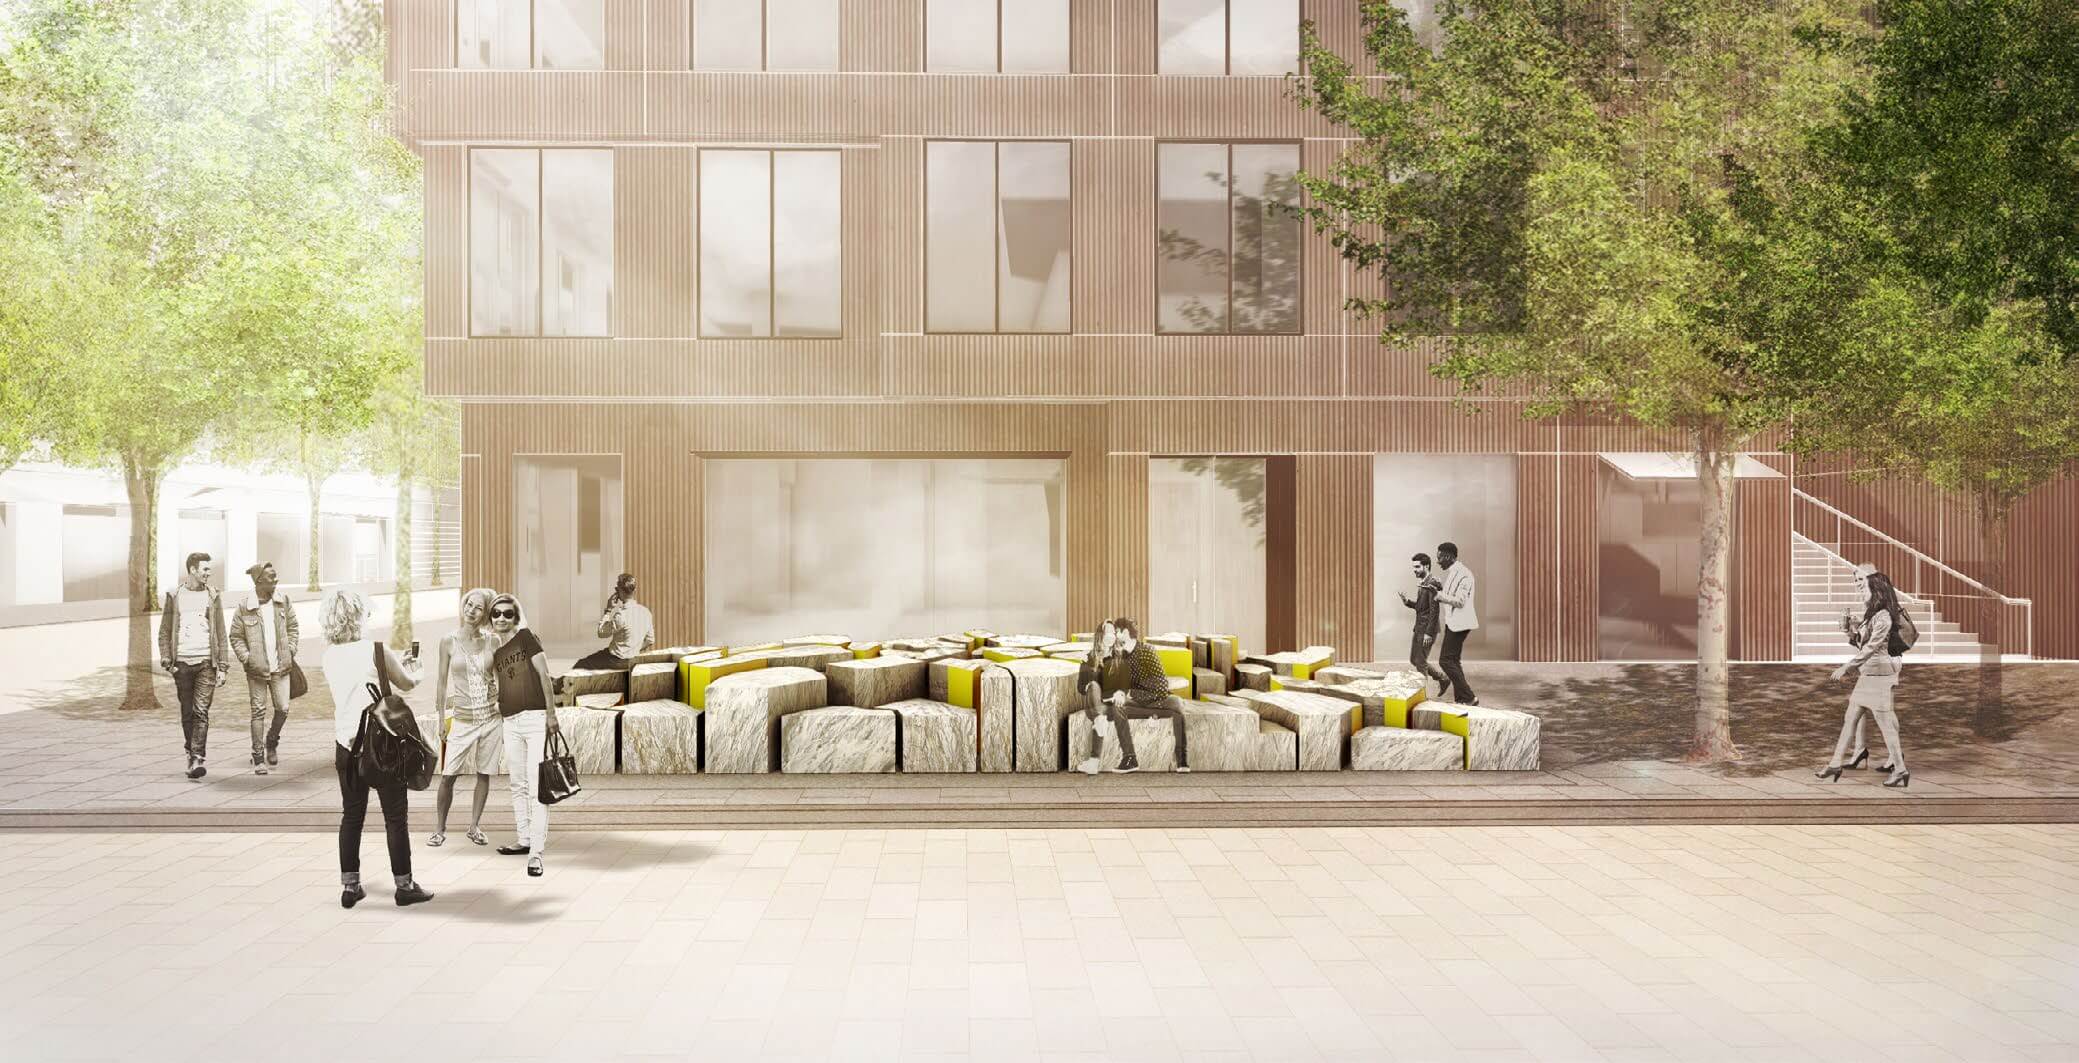 rendering of an outdoor interactive installation created from stone